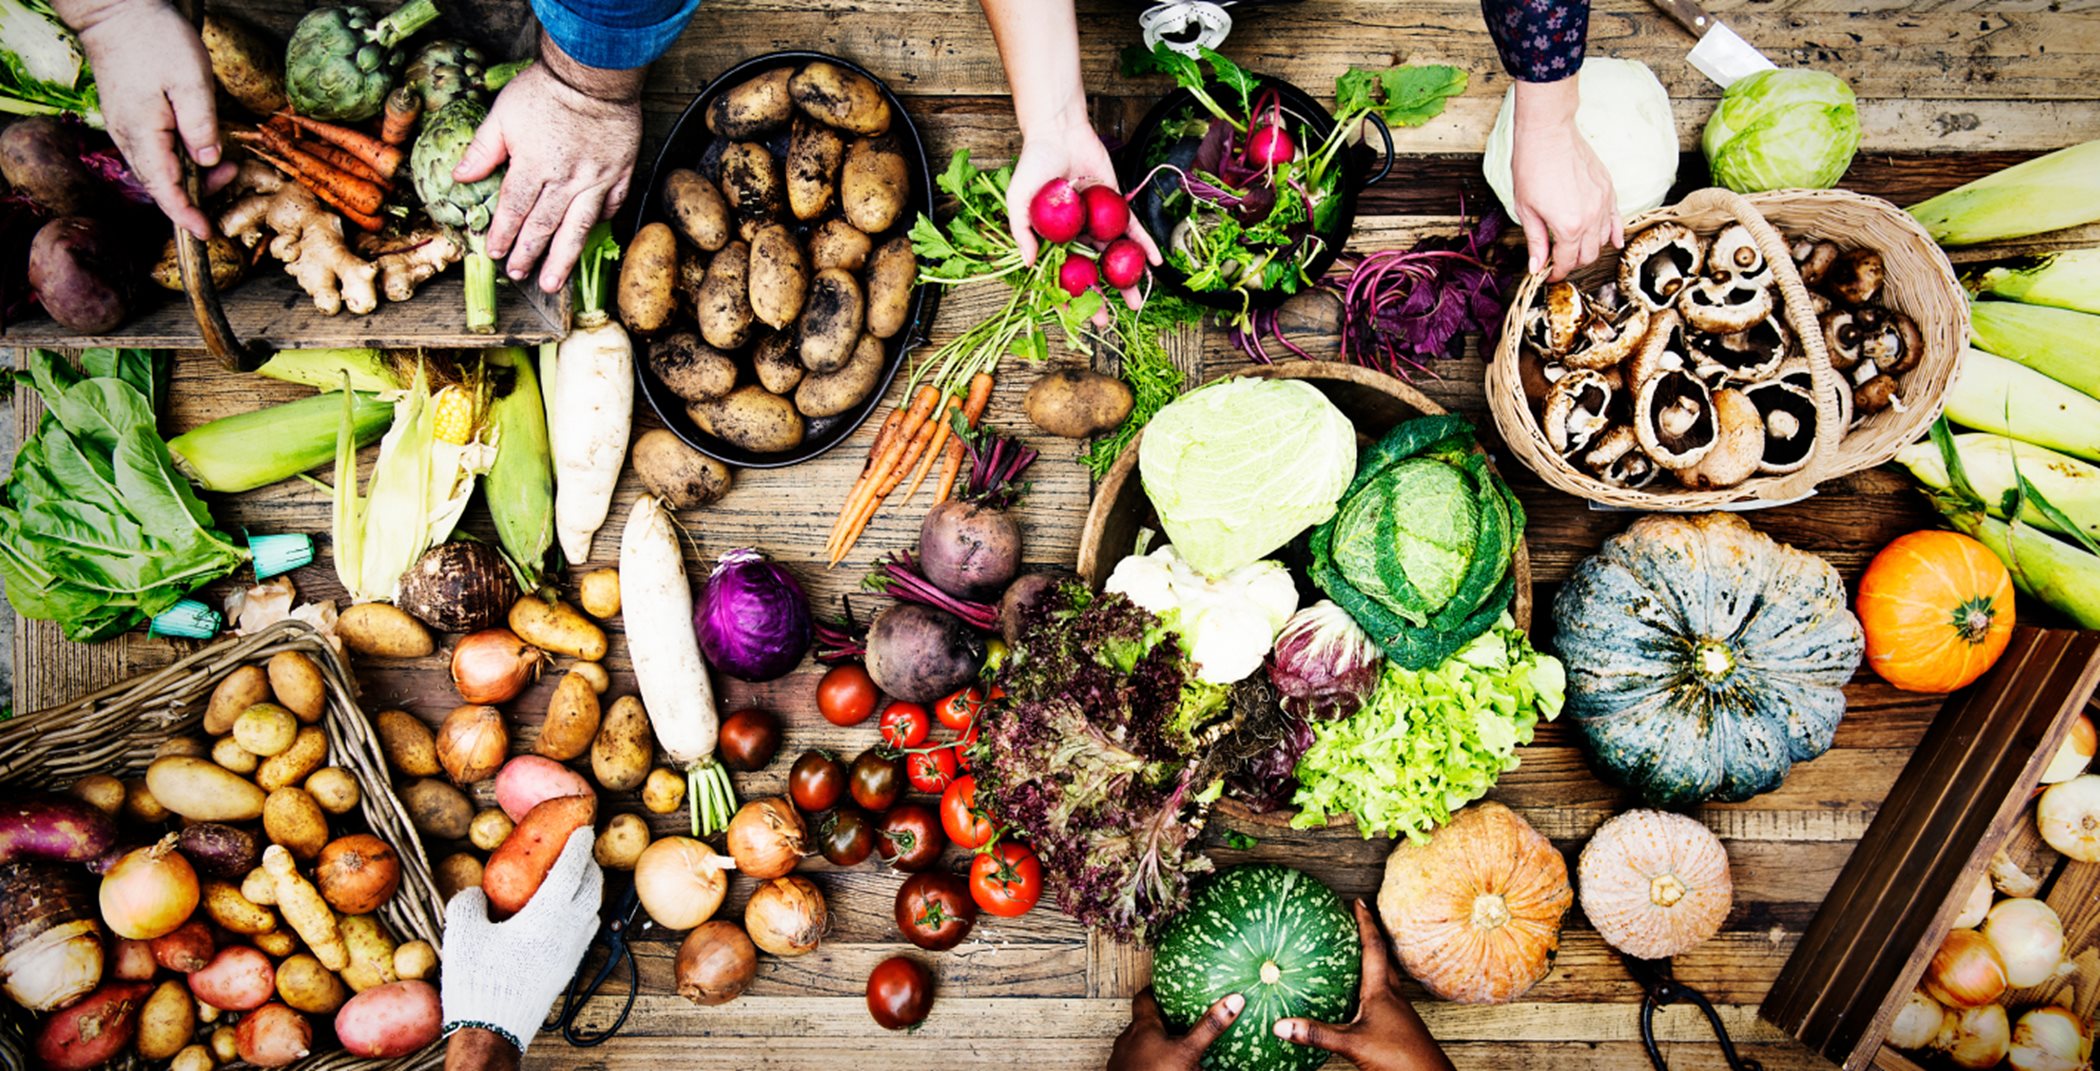 Overhead shot of people sharing fresh produce at a wooden table